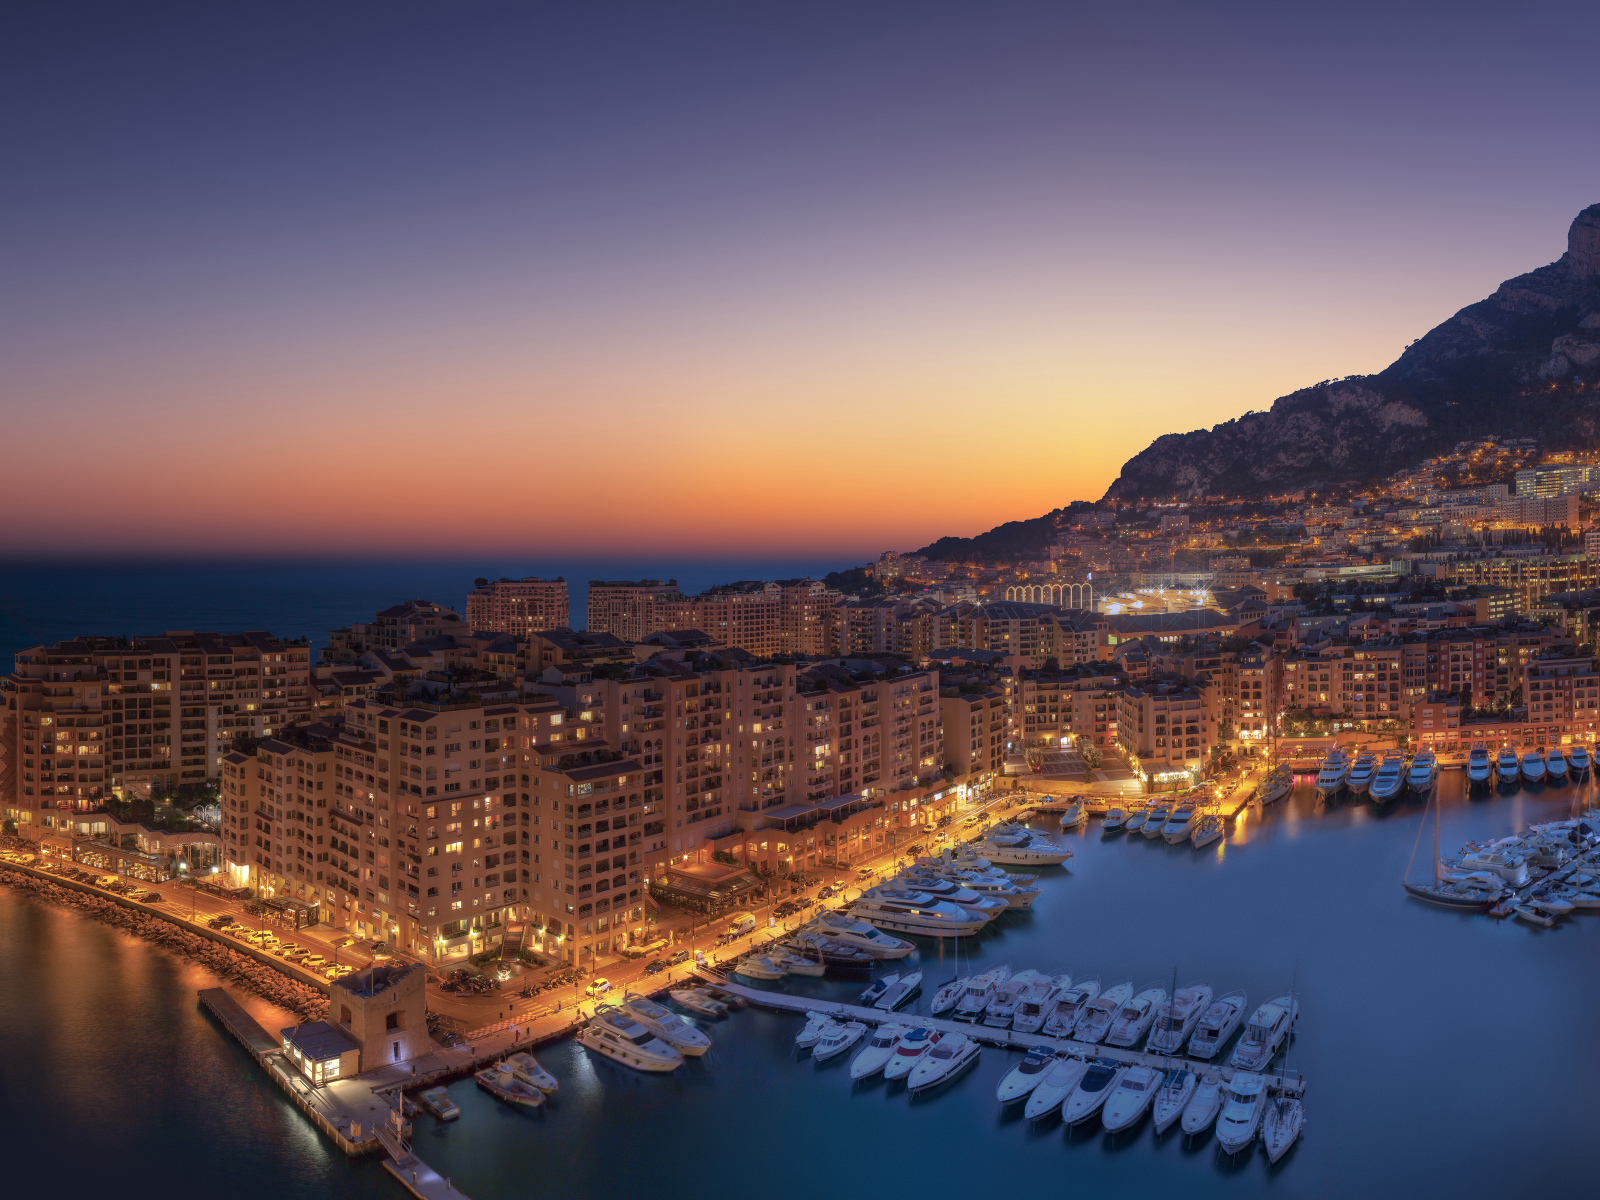 The beautiful night city of Monaco by the ocean